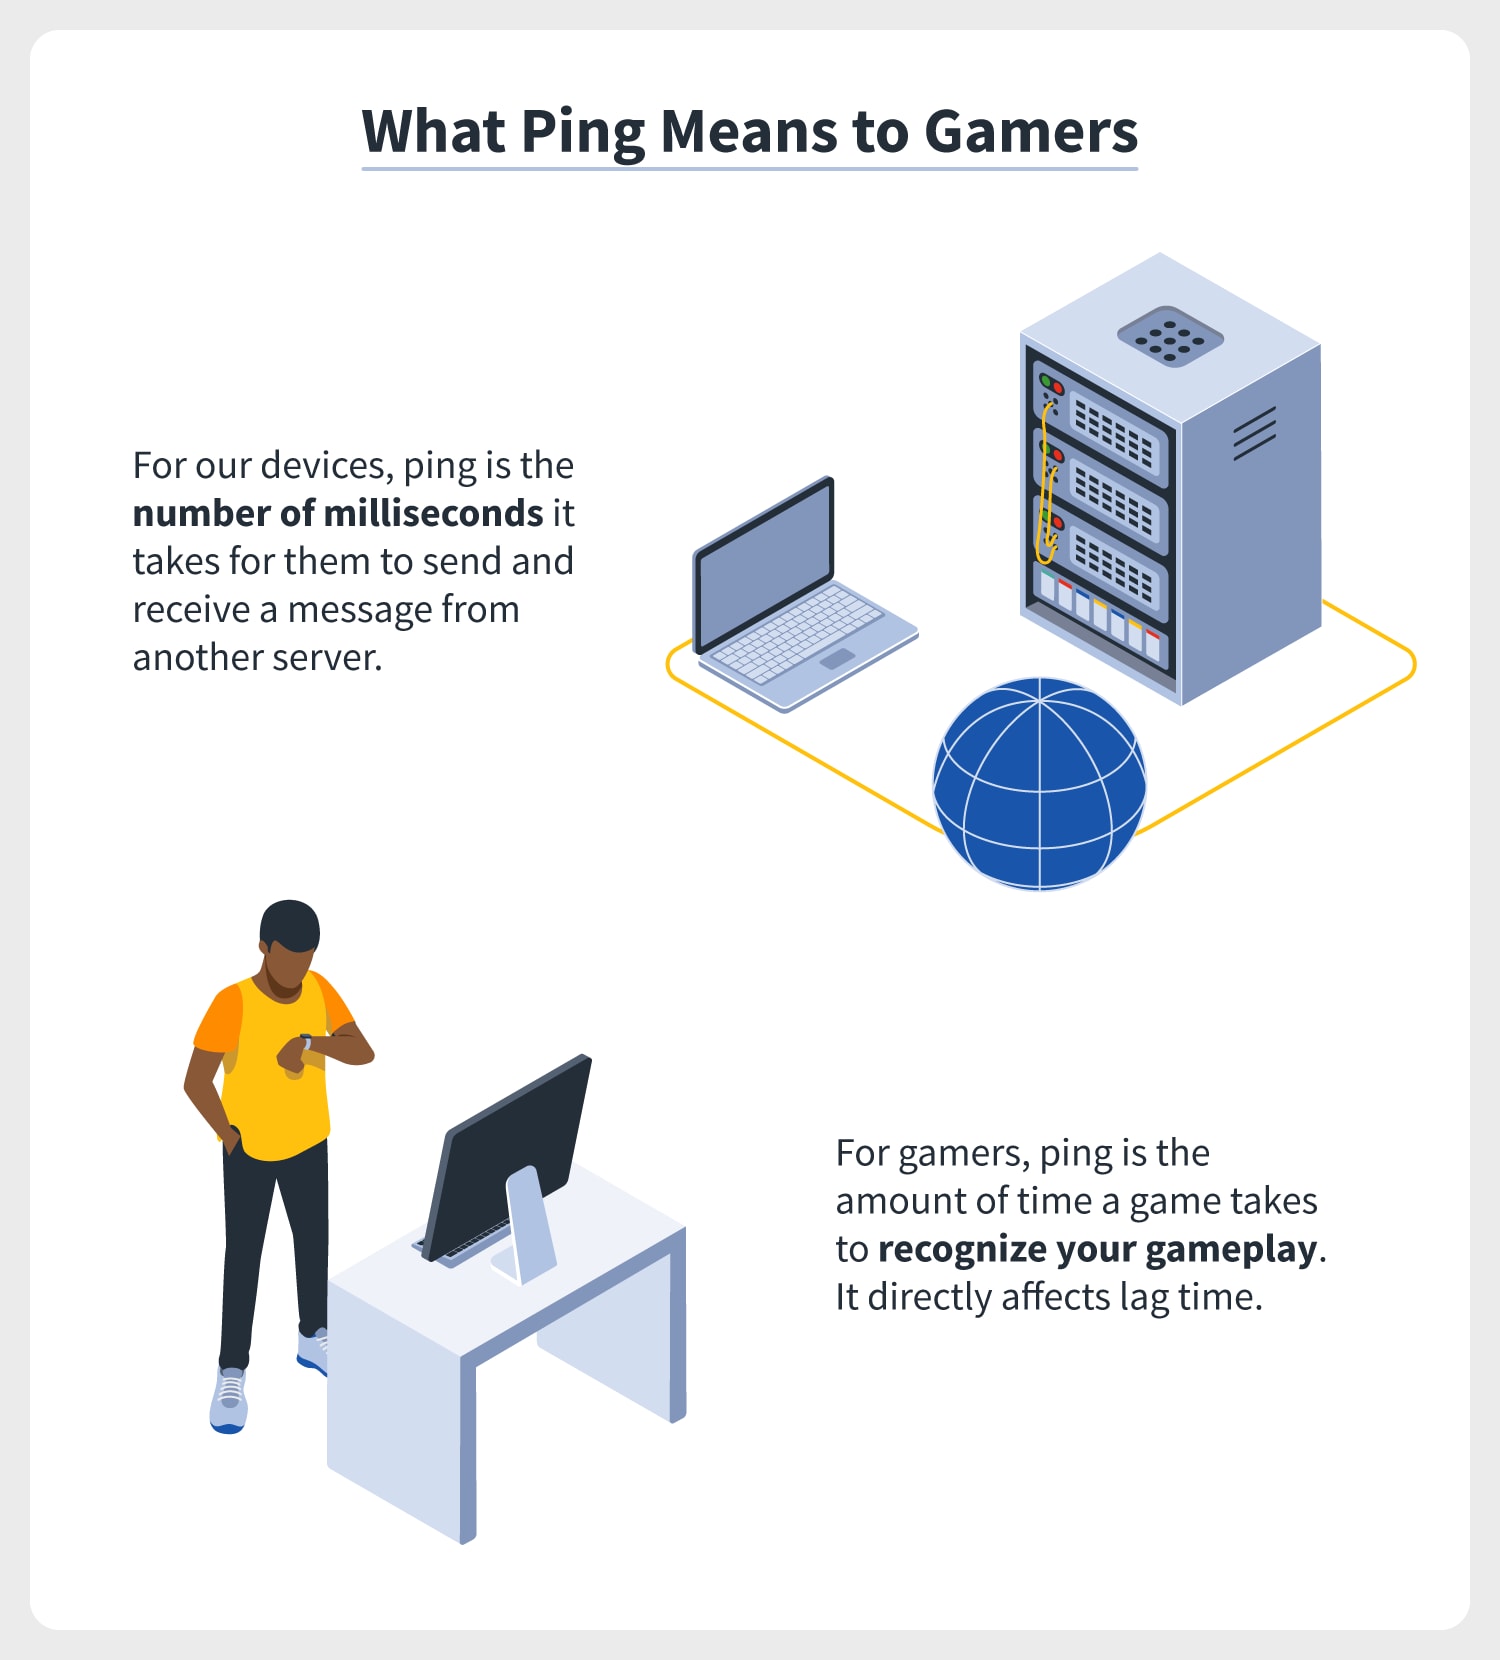 an explanation of what ping means for our devices and what ping means for gamers, including that low ping means reduced lag in video games